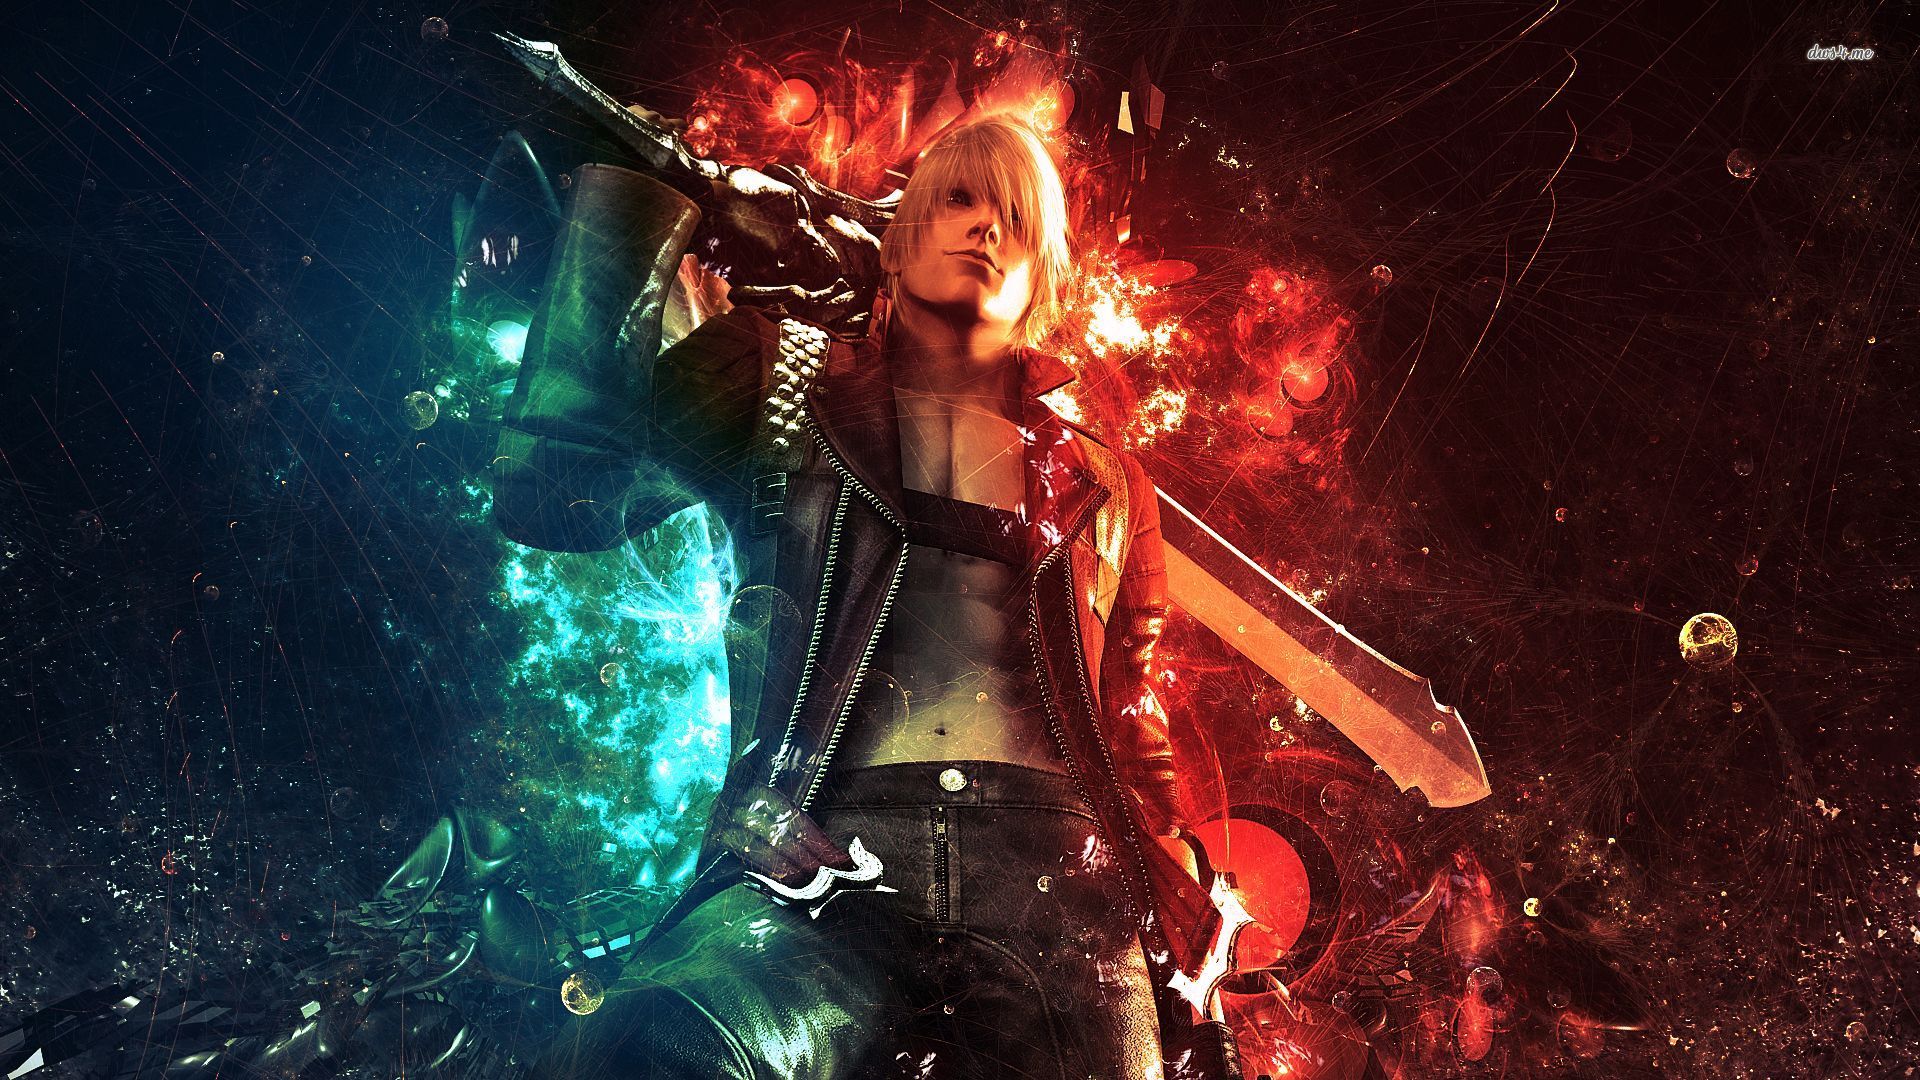 6426 devil may cry 3 dante 1920x1080 game wallpaper Evil Wallpapers HD 1920x1080